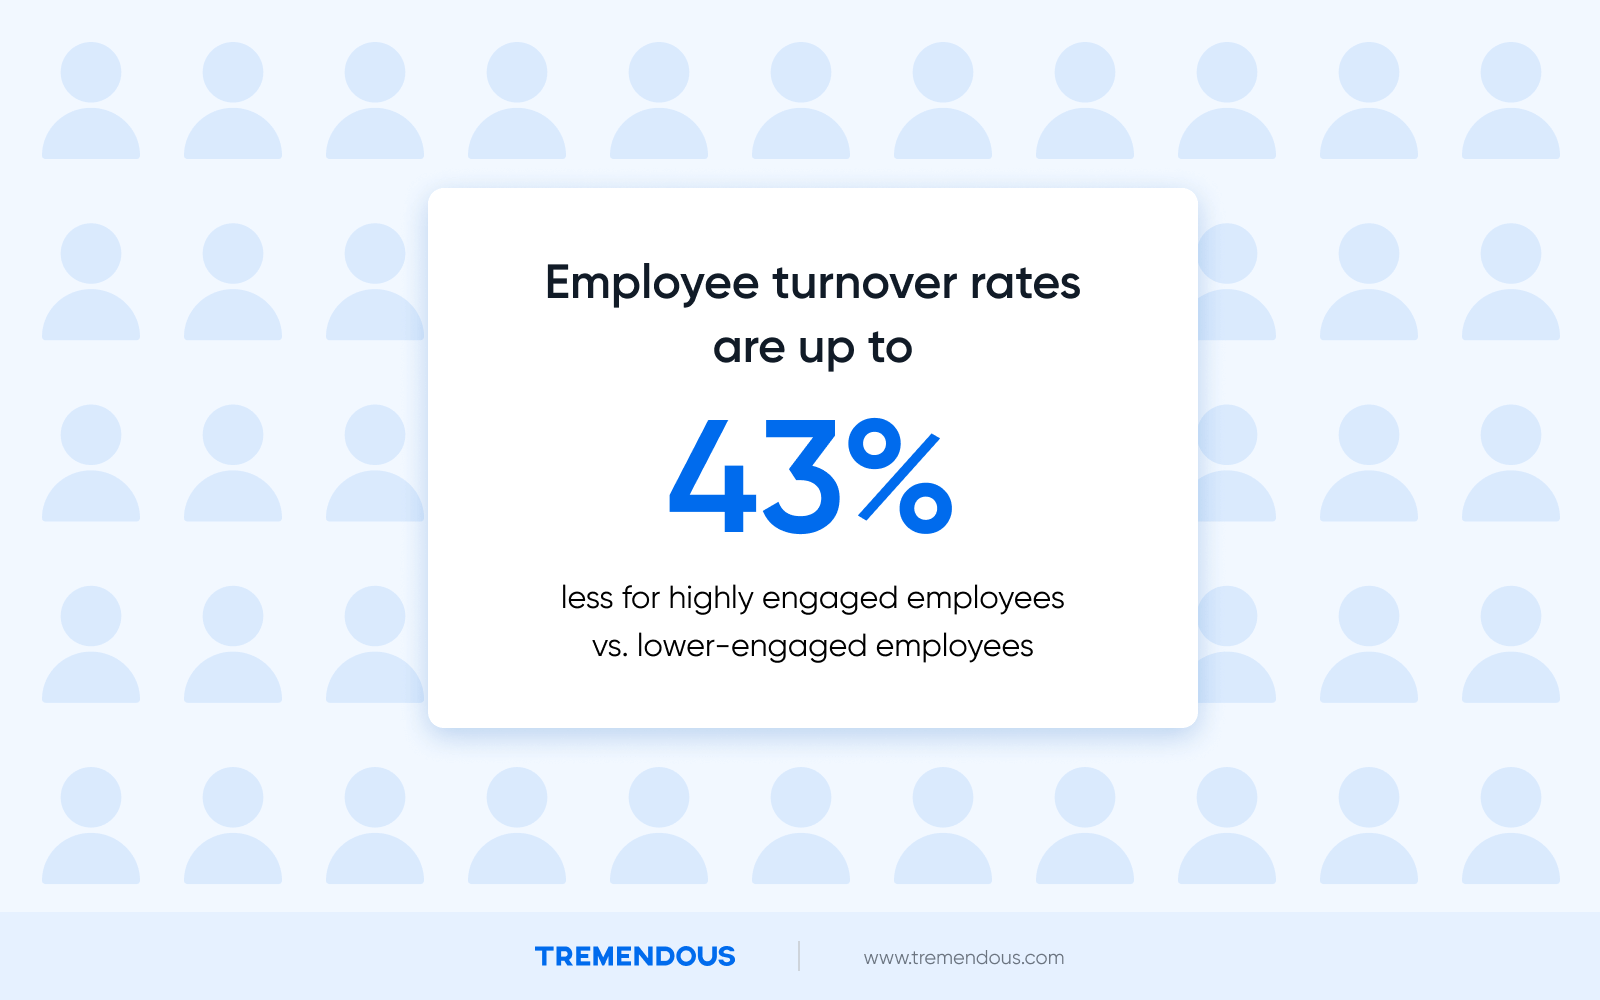 A text box says: "employee turnover rates are up to 43% less for highly engaged employees vs. lower-engaged employees."